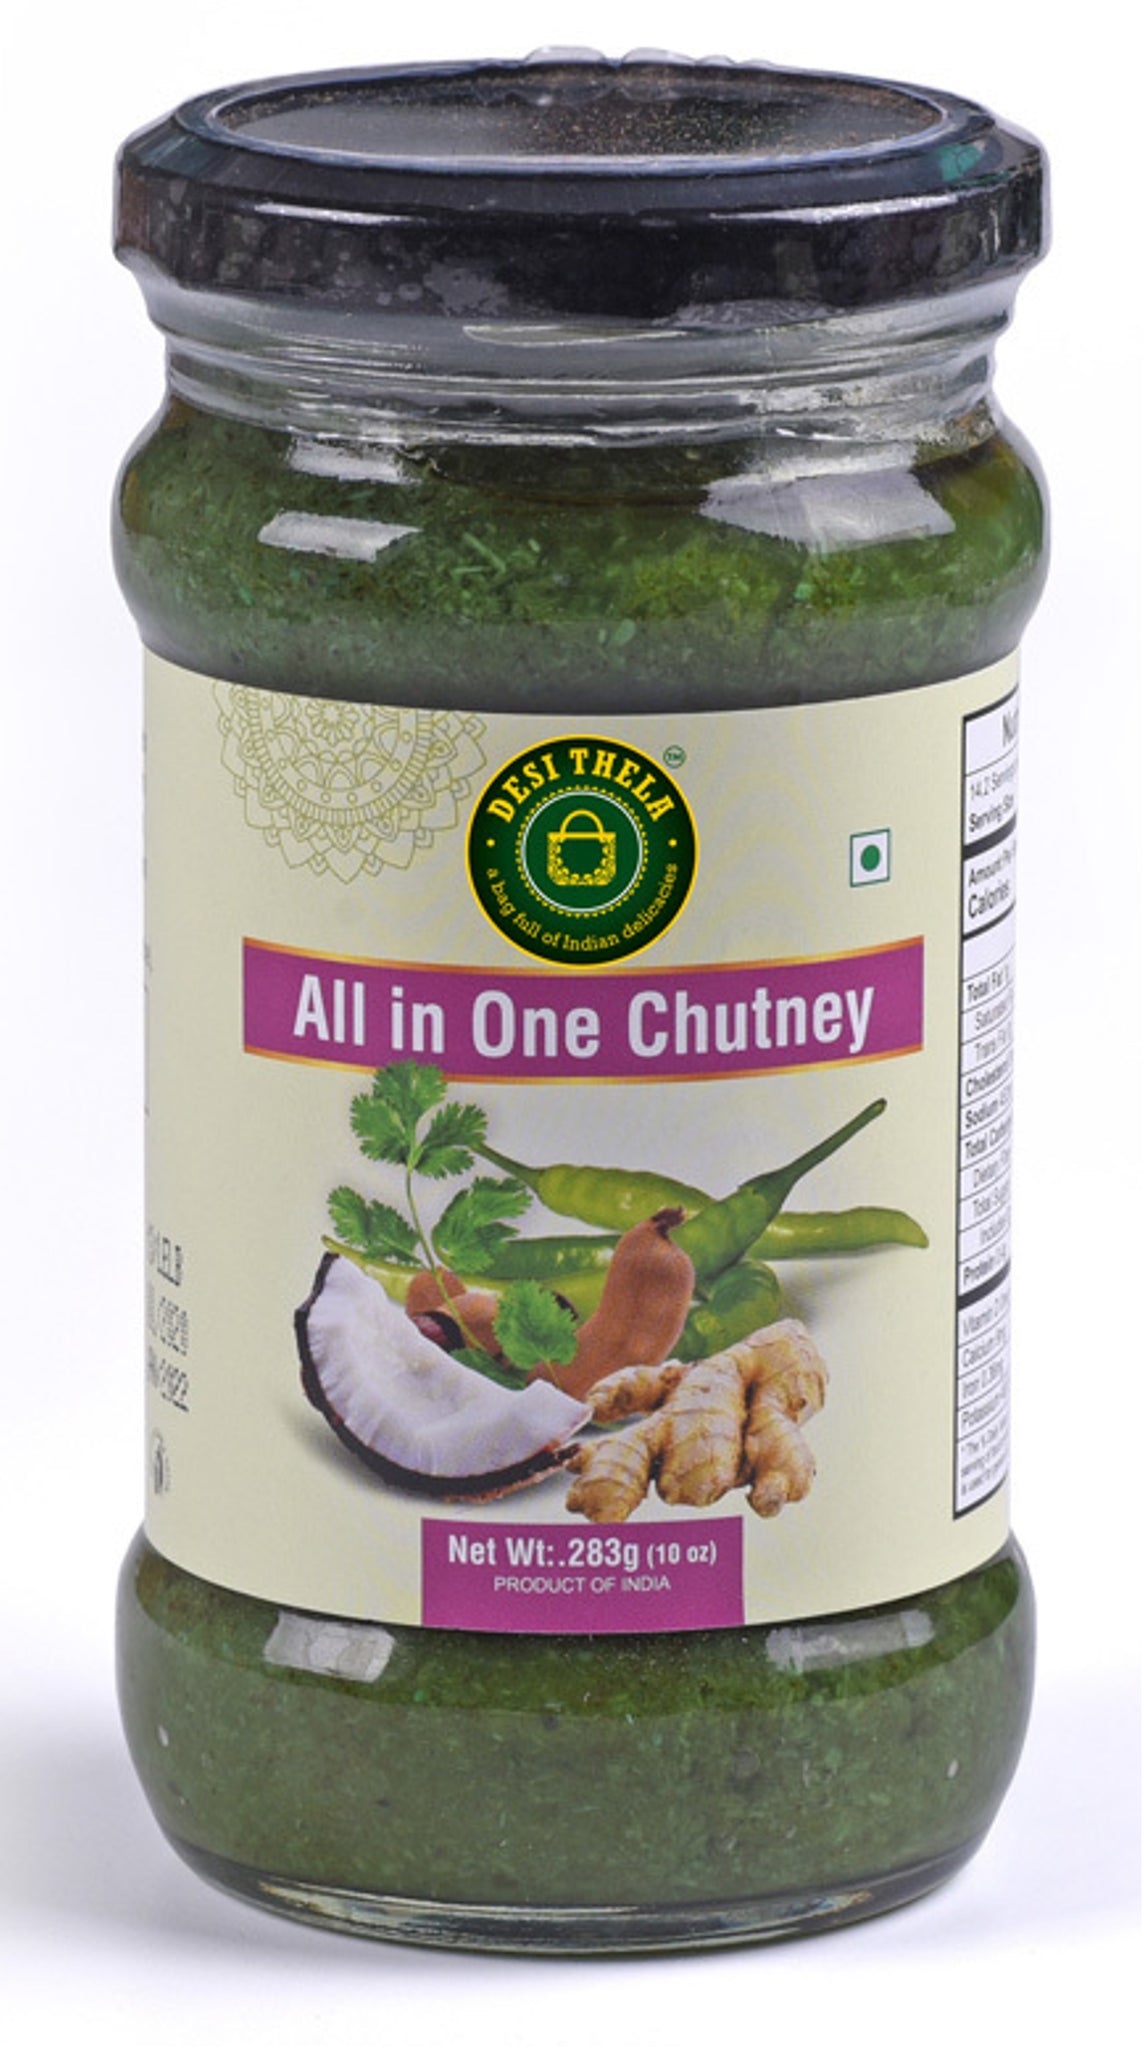 All in One Chutney